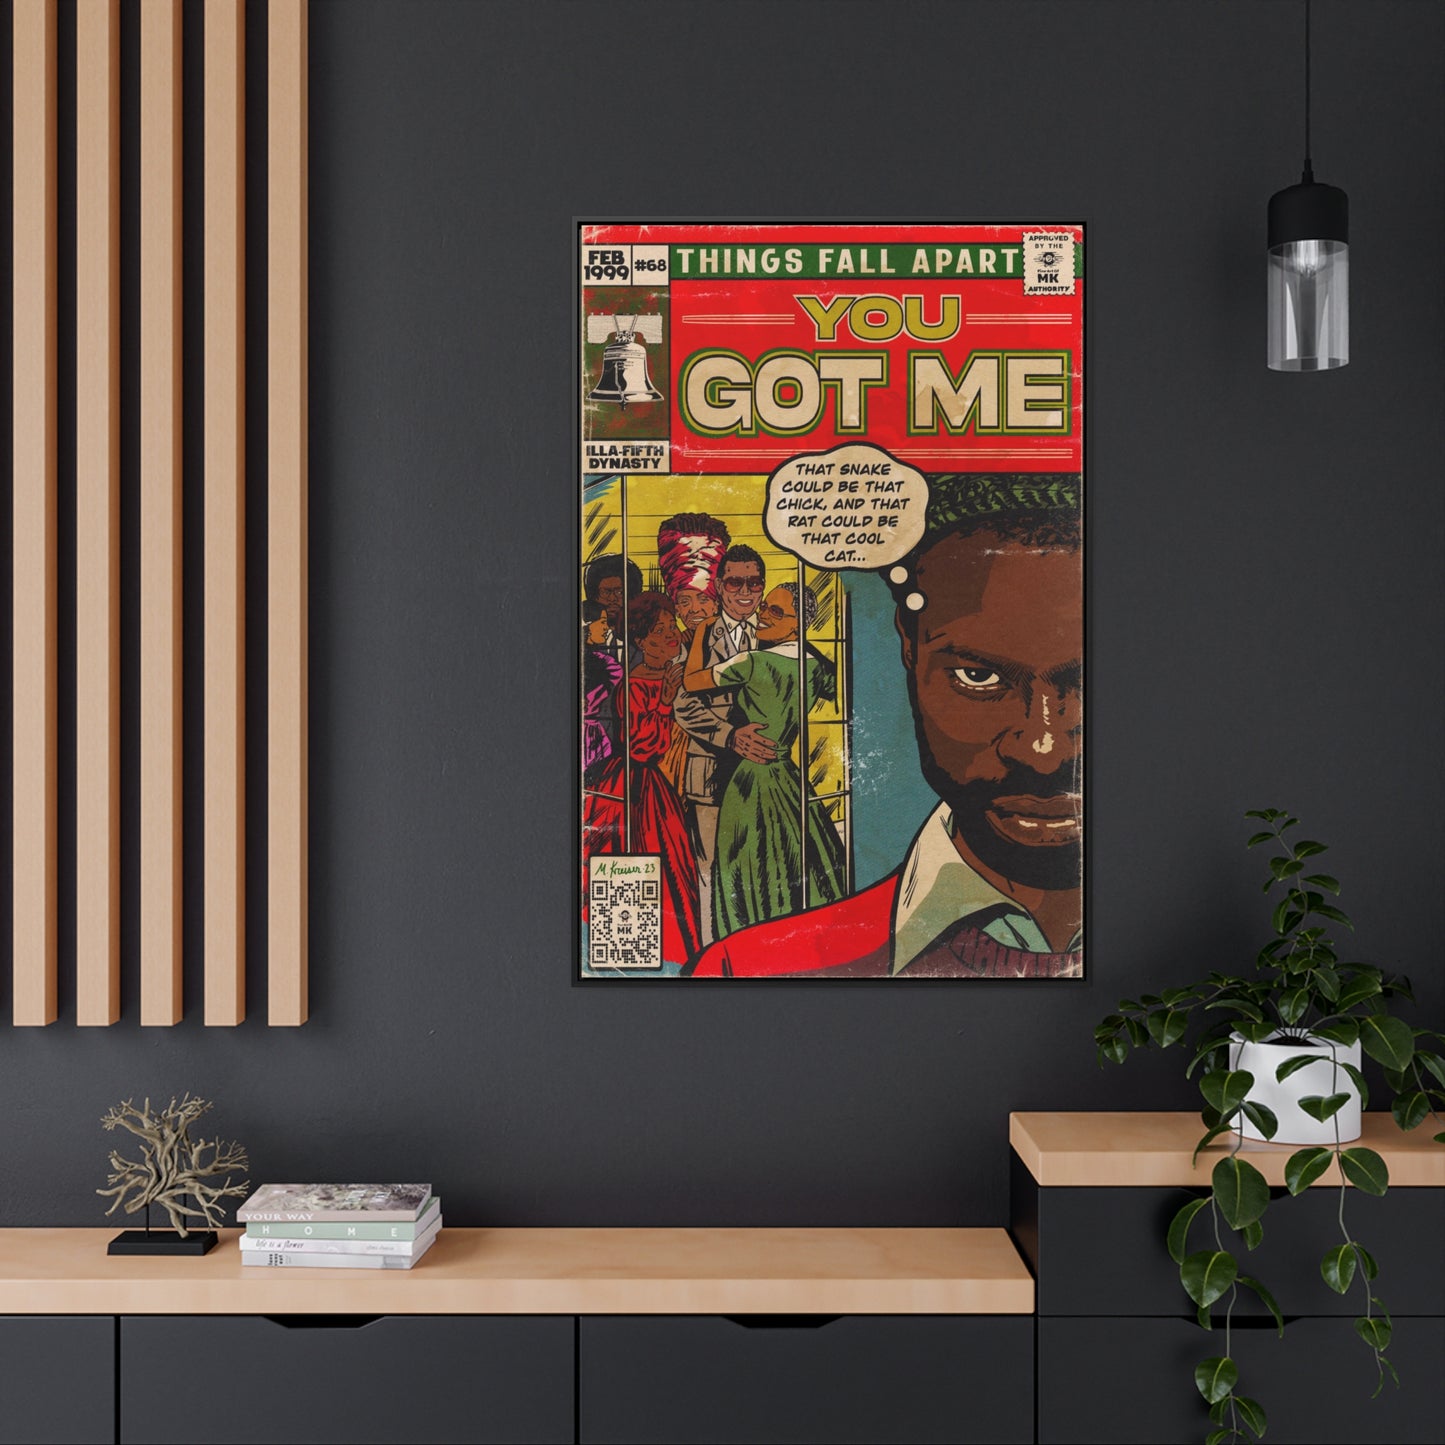 The Roots - You Got Me featuring Erykah Badu & Eve - Gallery Canvas Wraps, Vertical Frame